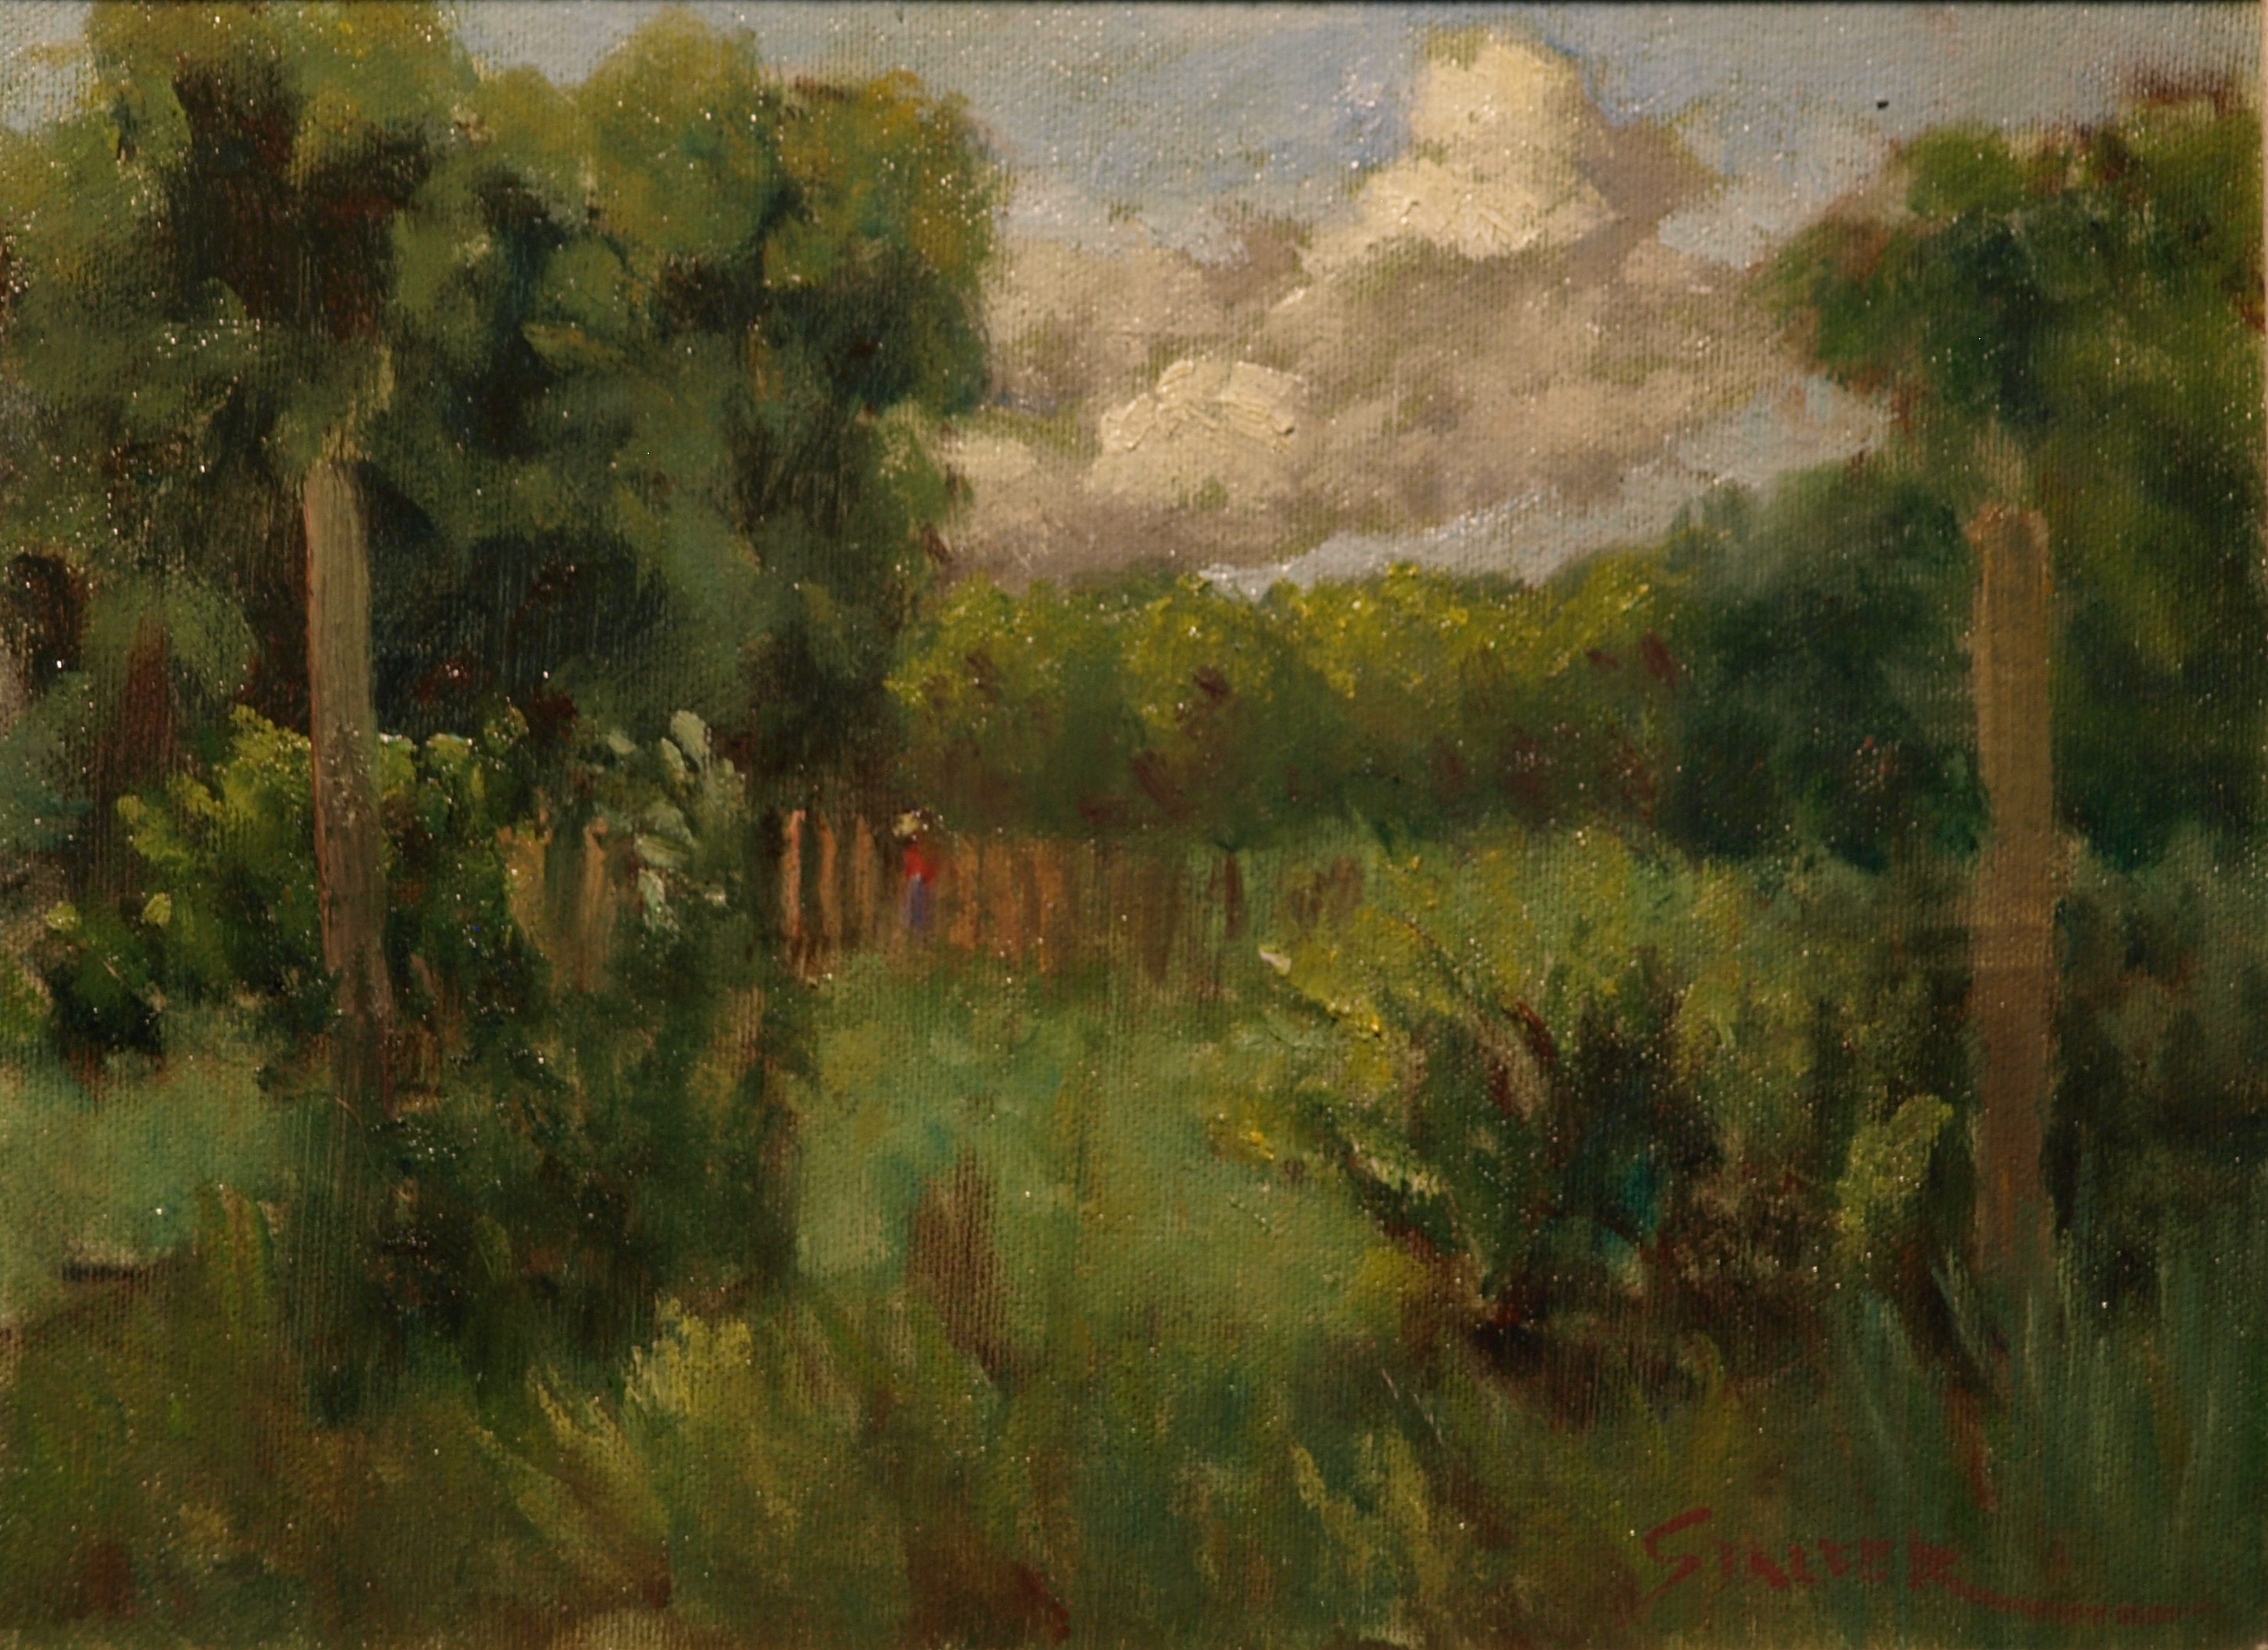 Megan Haney's Farm, Oil on Canvas on Panel, 9 x 12 Inches, by Richard Stalter, $225